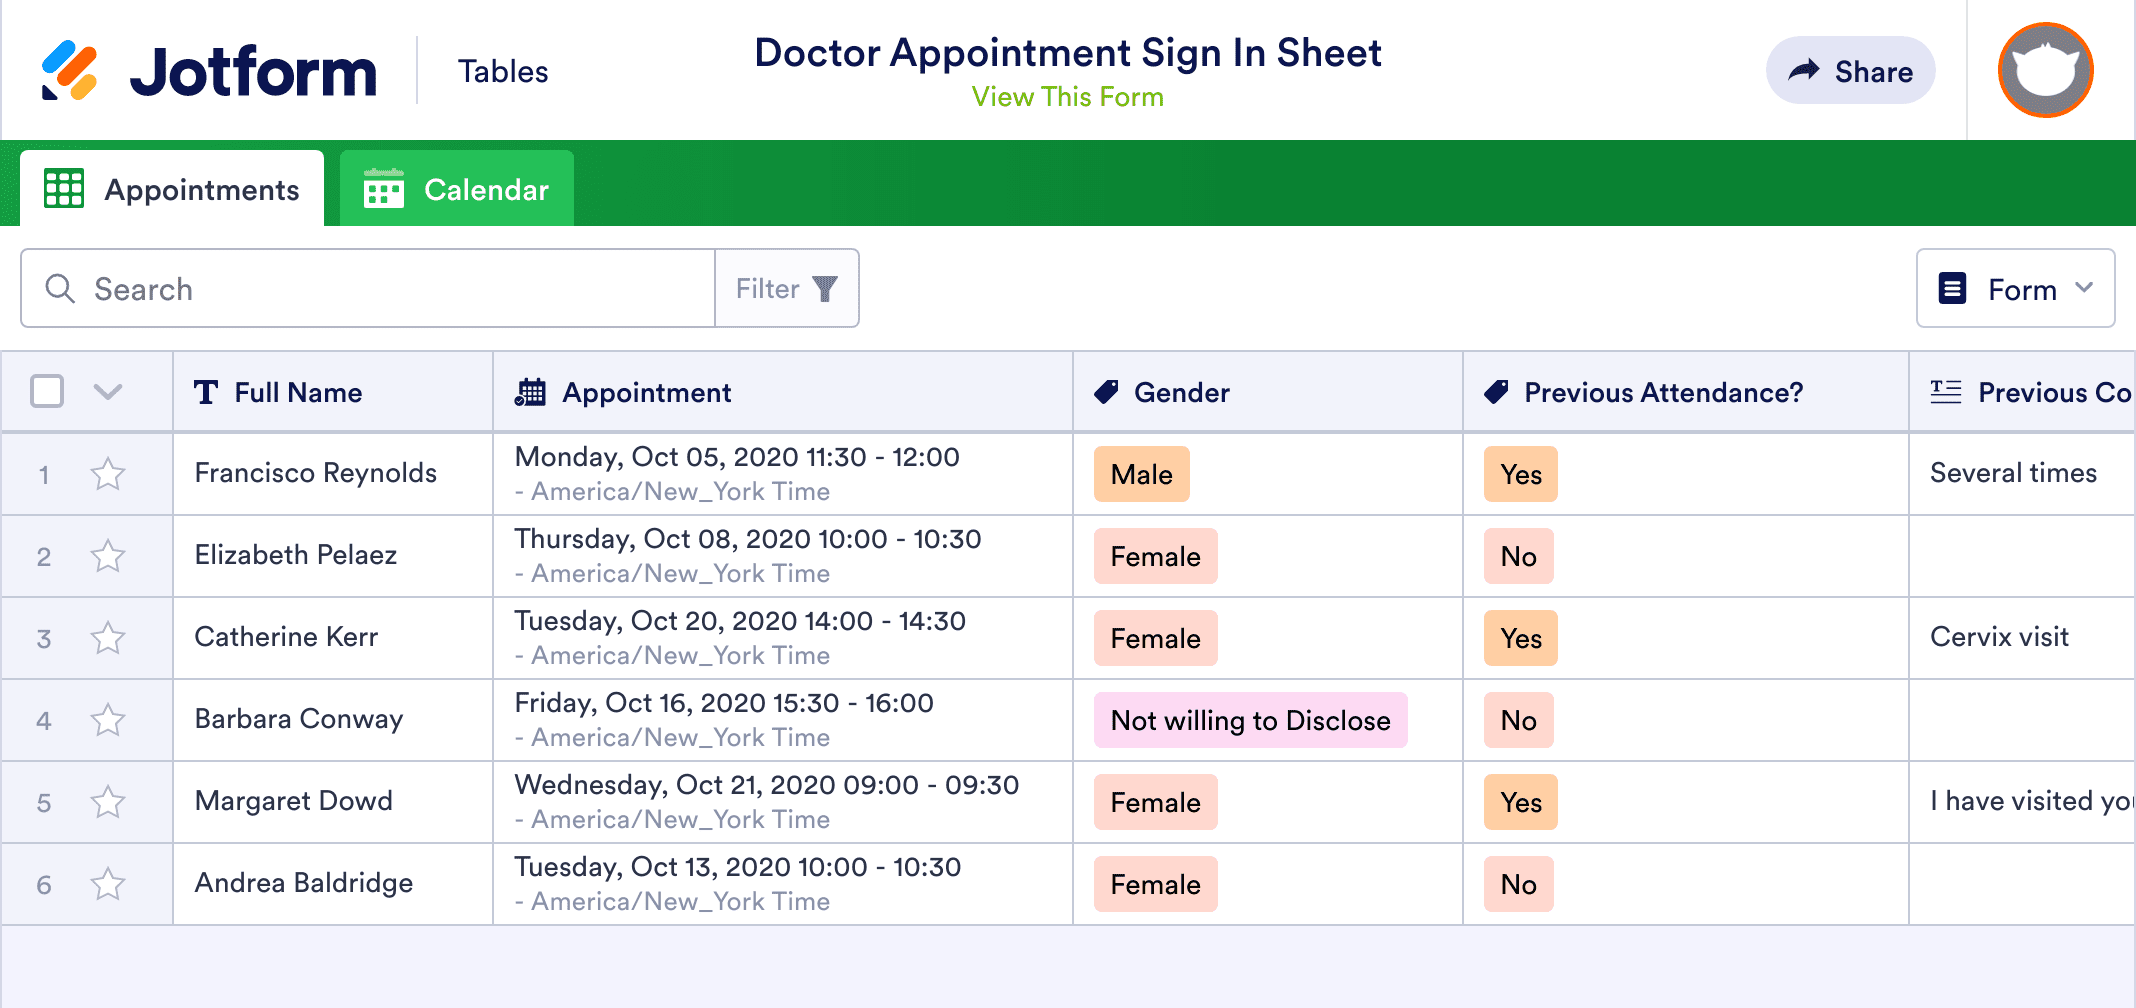 Doctor Appointment Sign In Sheet